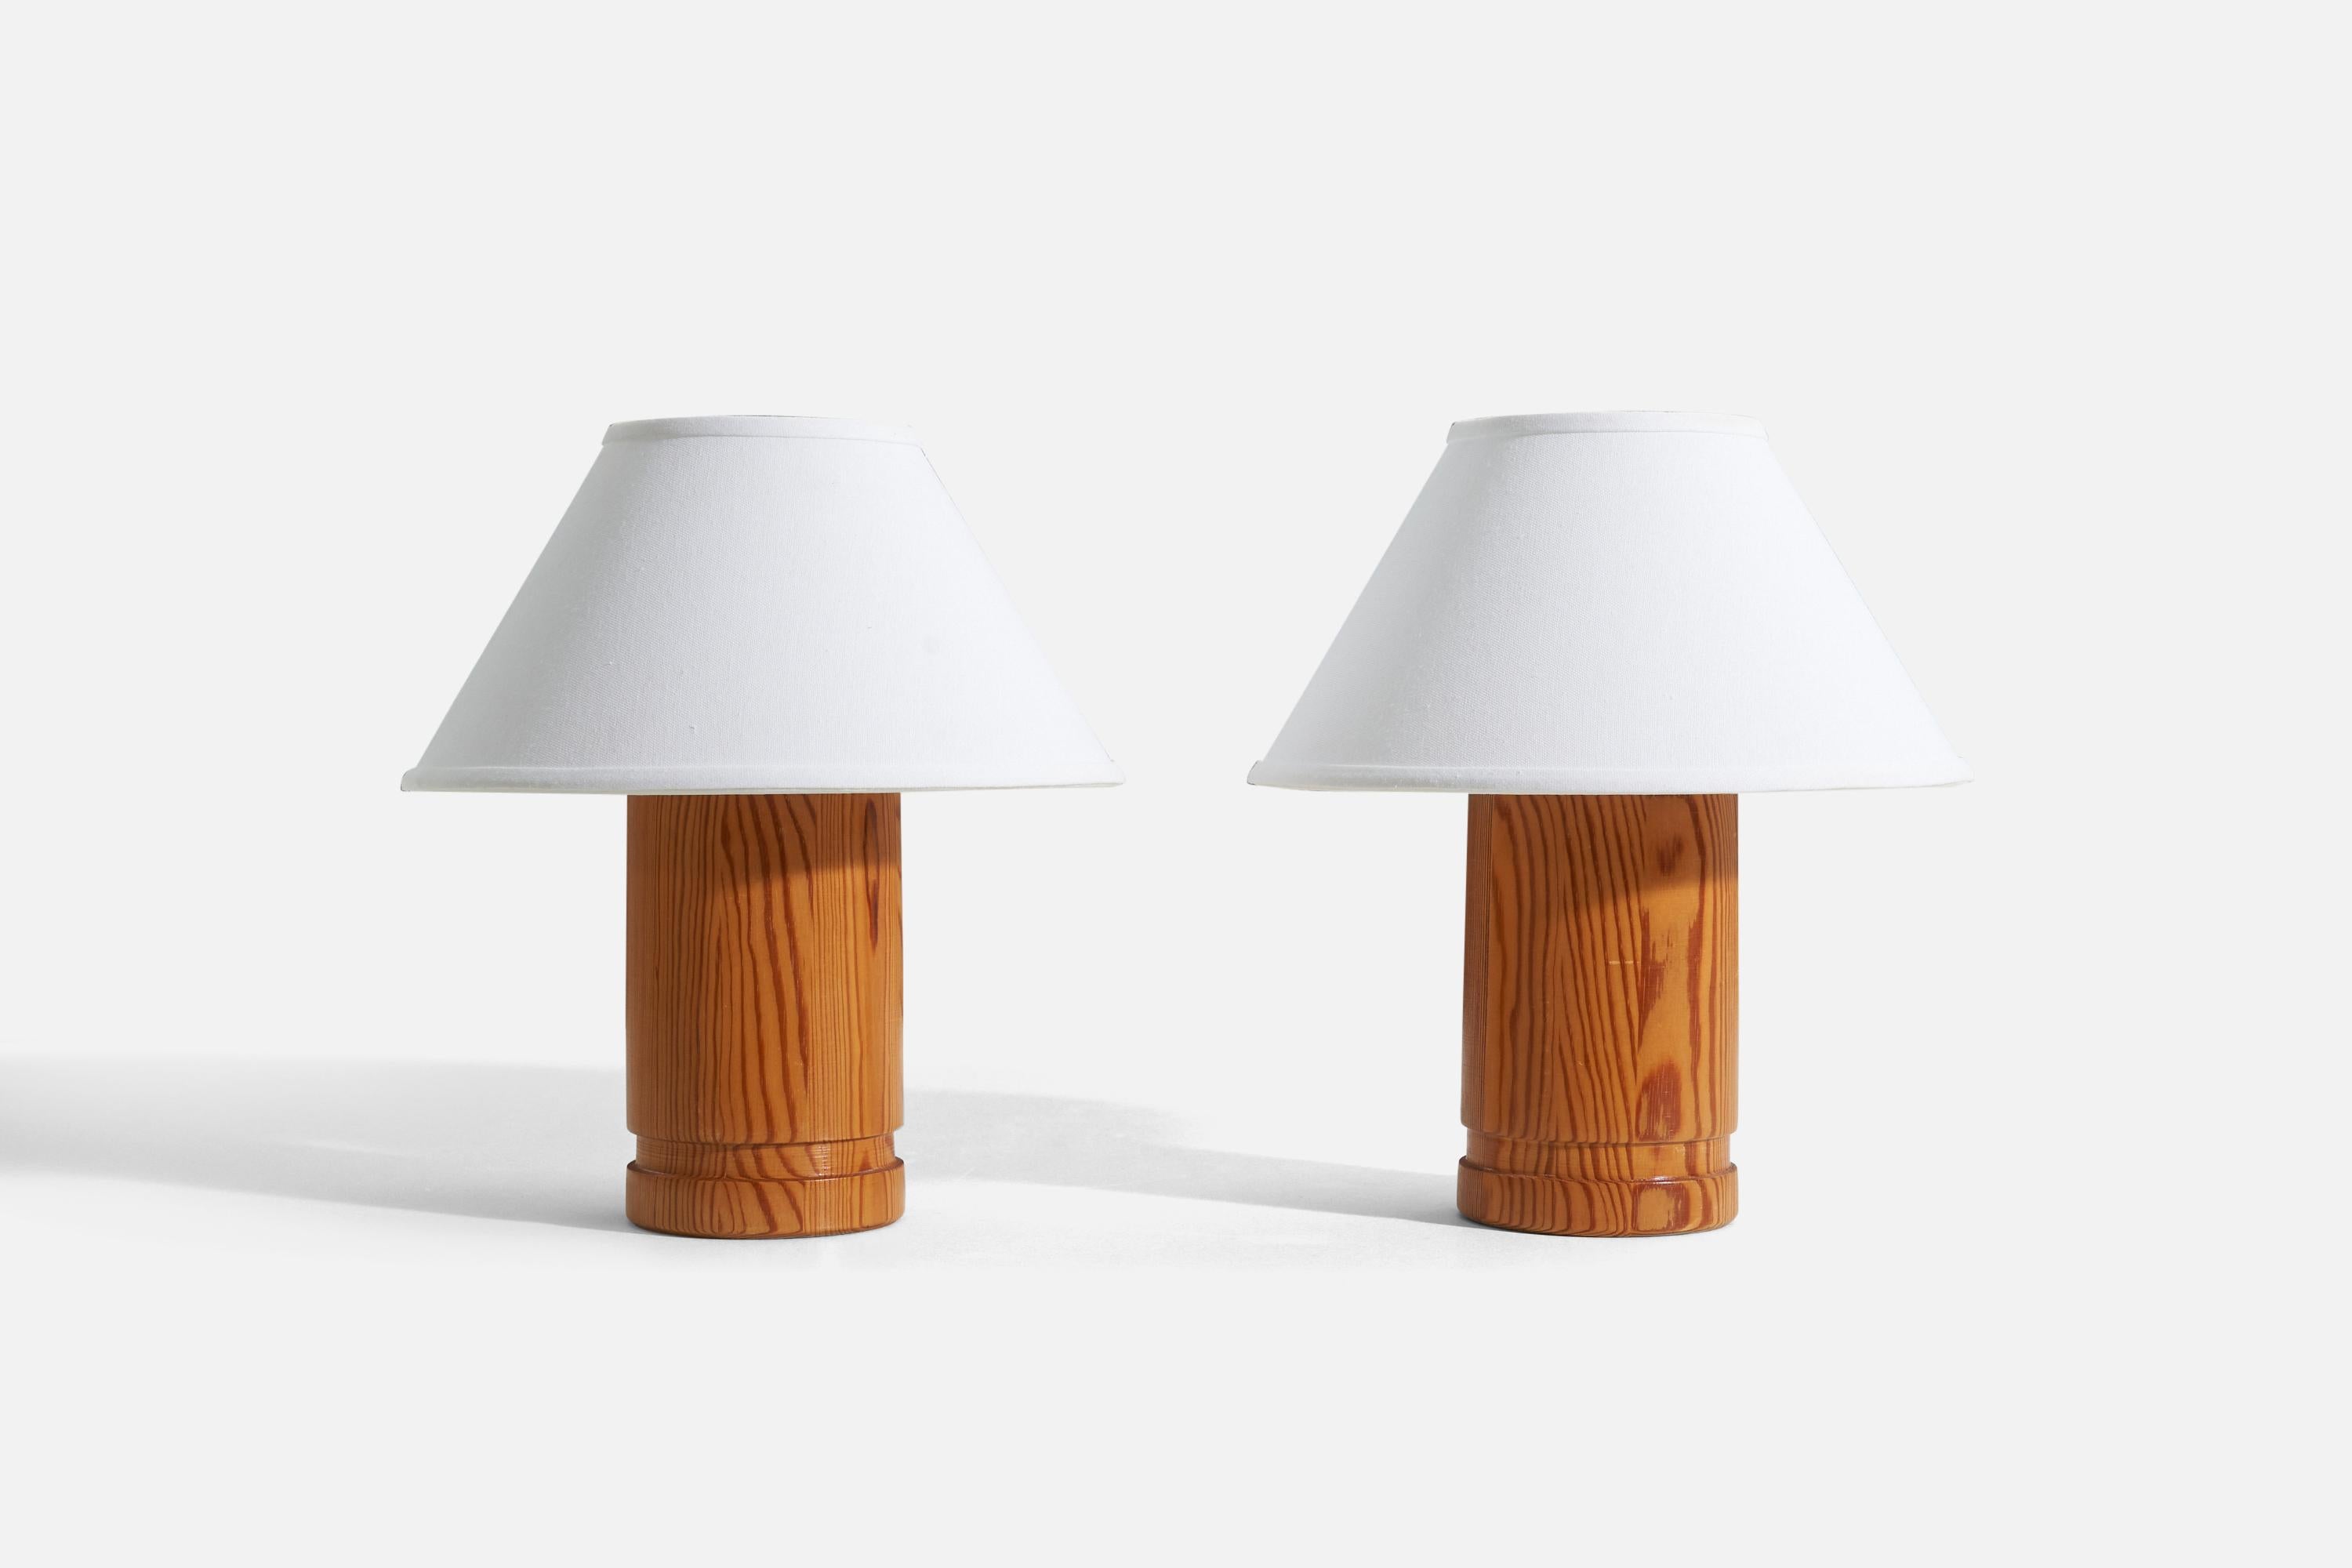 A pair of light wood table lamps designed by Hans-Agne Jakobsson, Sweden, 1970s. Marked with makers label 